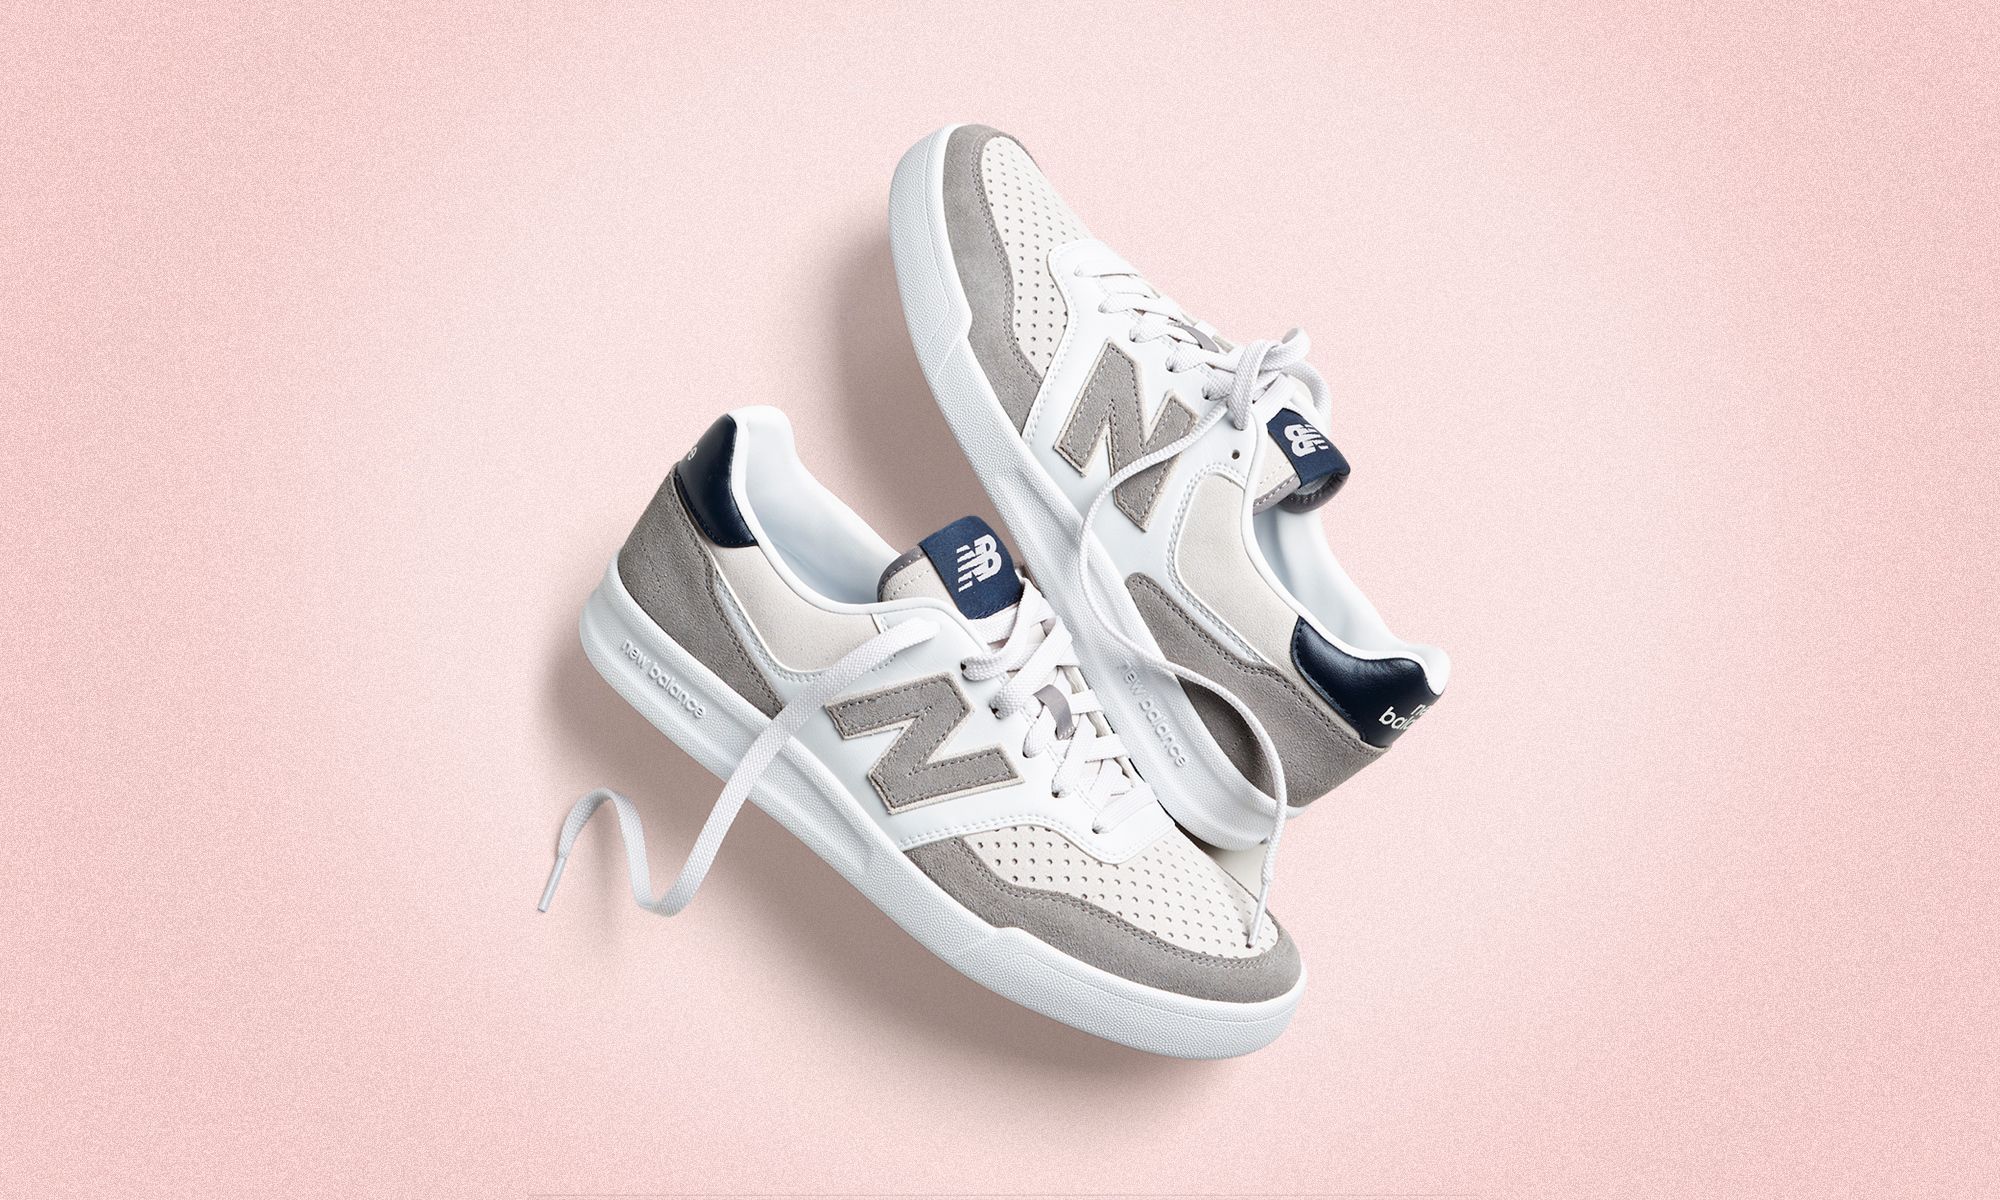 New Balance x J.Crew CRT300 V2 Sneakers Release, Price, and Where 